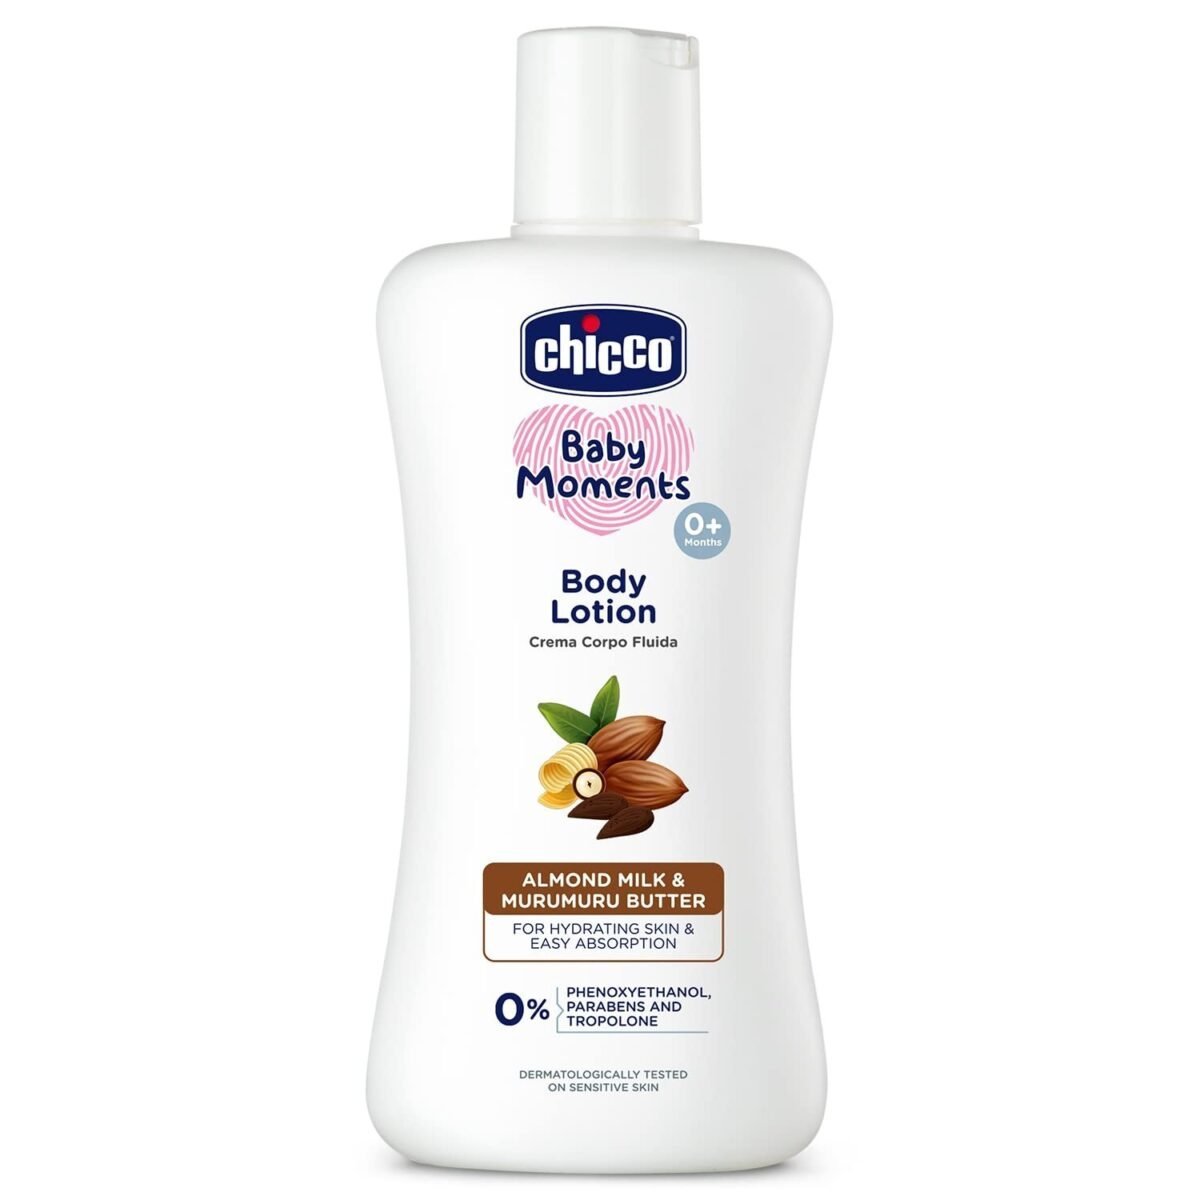 Chicco Baby Moments Body Lotion, New Advanced Formula with Natural Ingredients for Daily Moisturization, Suitable for Baby’s